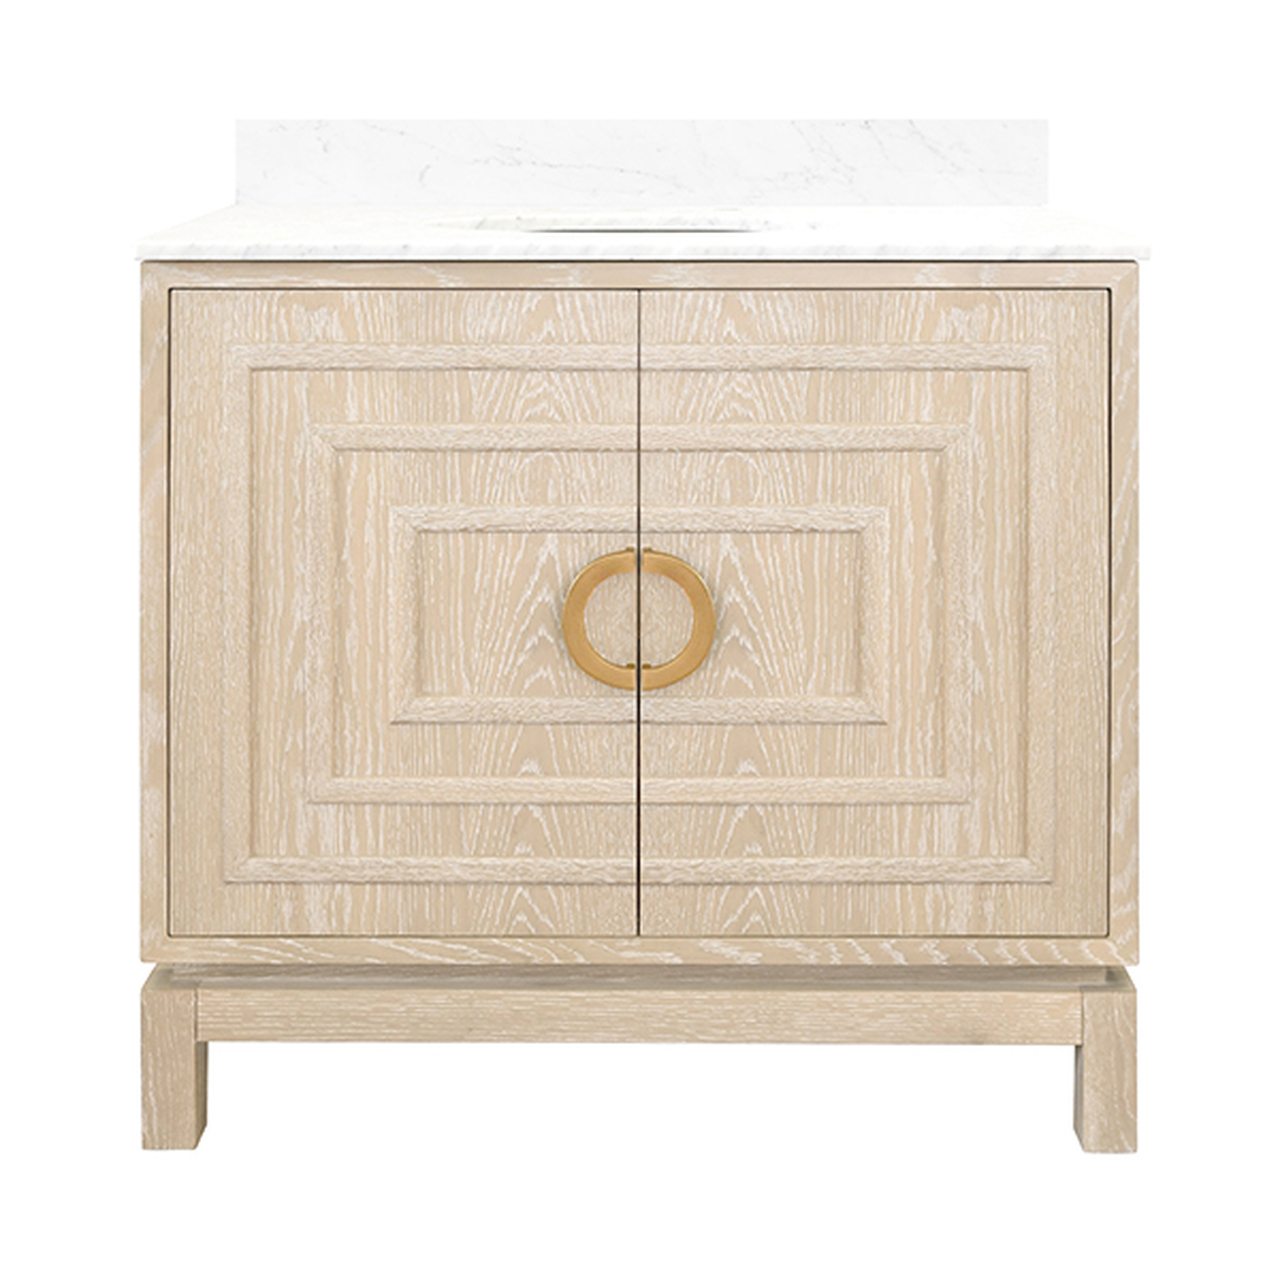 36" Issac Edwards Collection Bath Vanity in Matte Cerused Oak Finsih with White Marble Top and Porcelain Sink